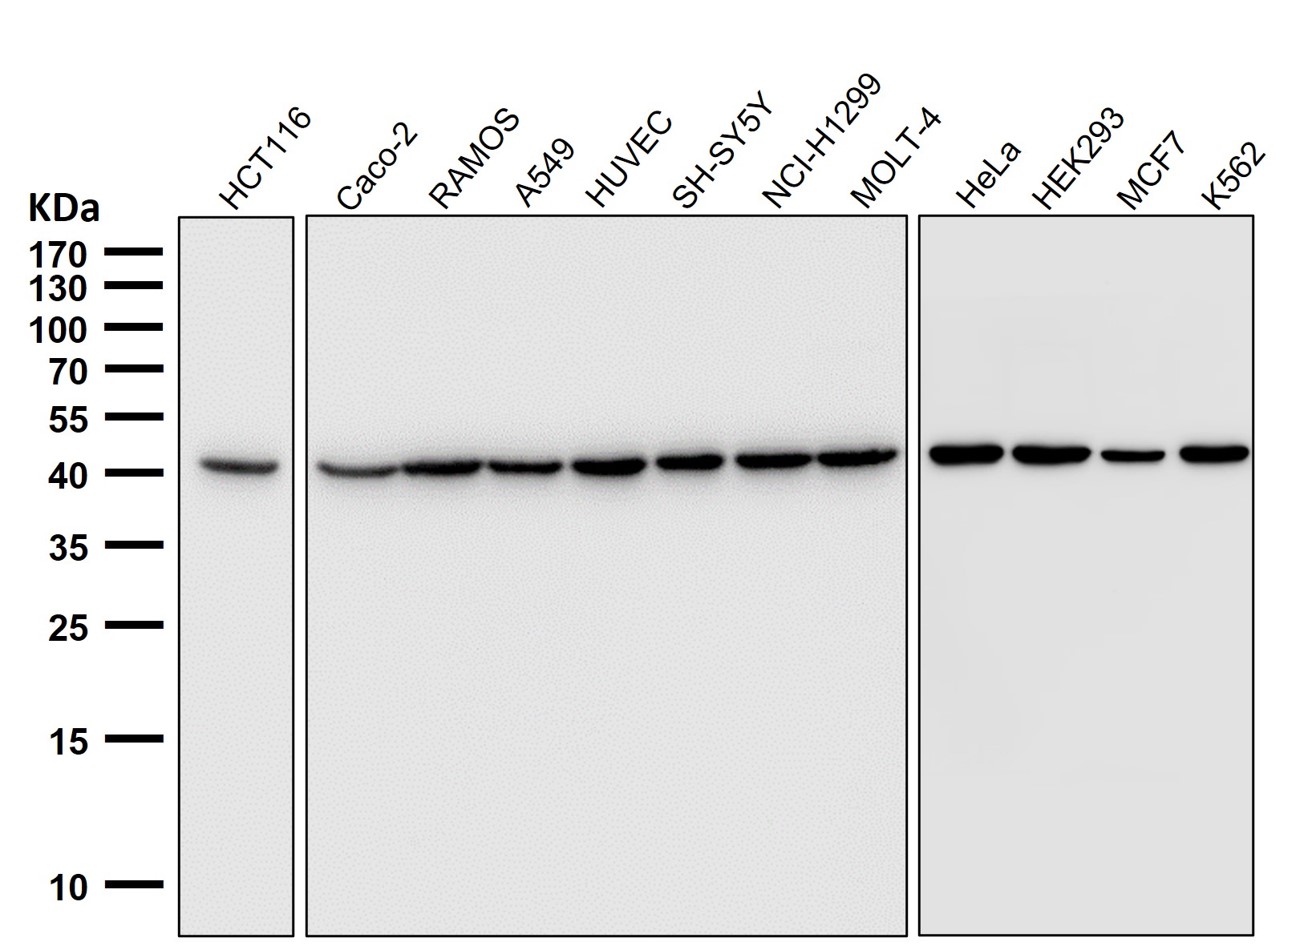 All lanes use AB0035 beta Actin Antibody at 1:50000 dilution for 1 hour at room temperature.